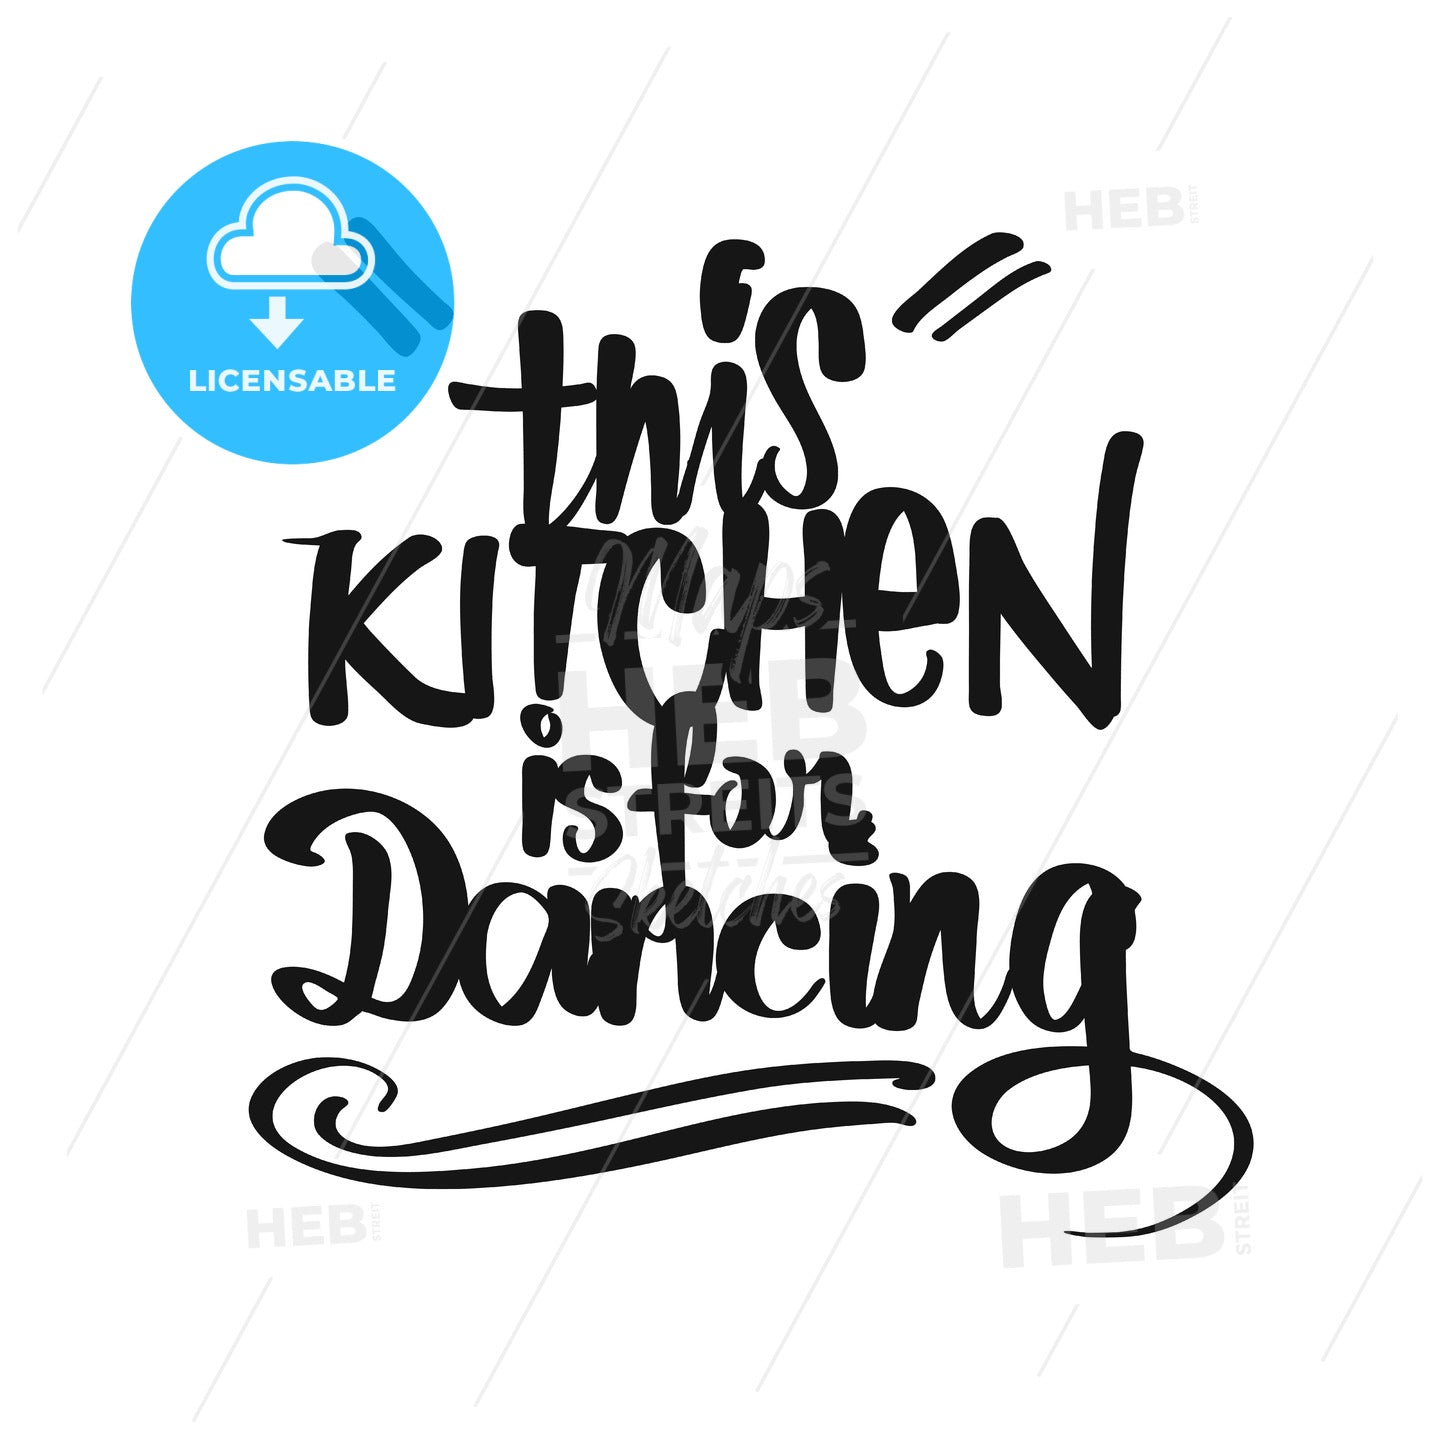 This Kitchen Is For Dancing handwritten lettering – instant download